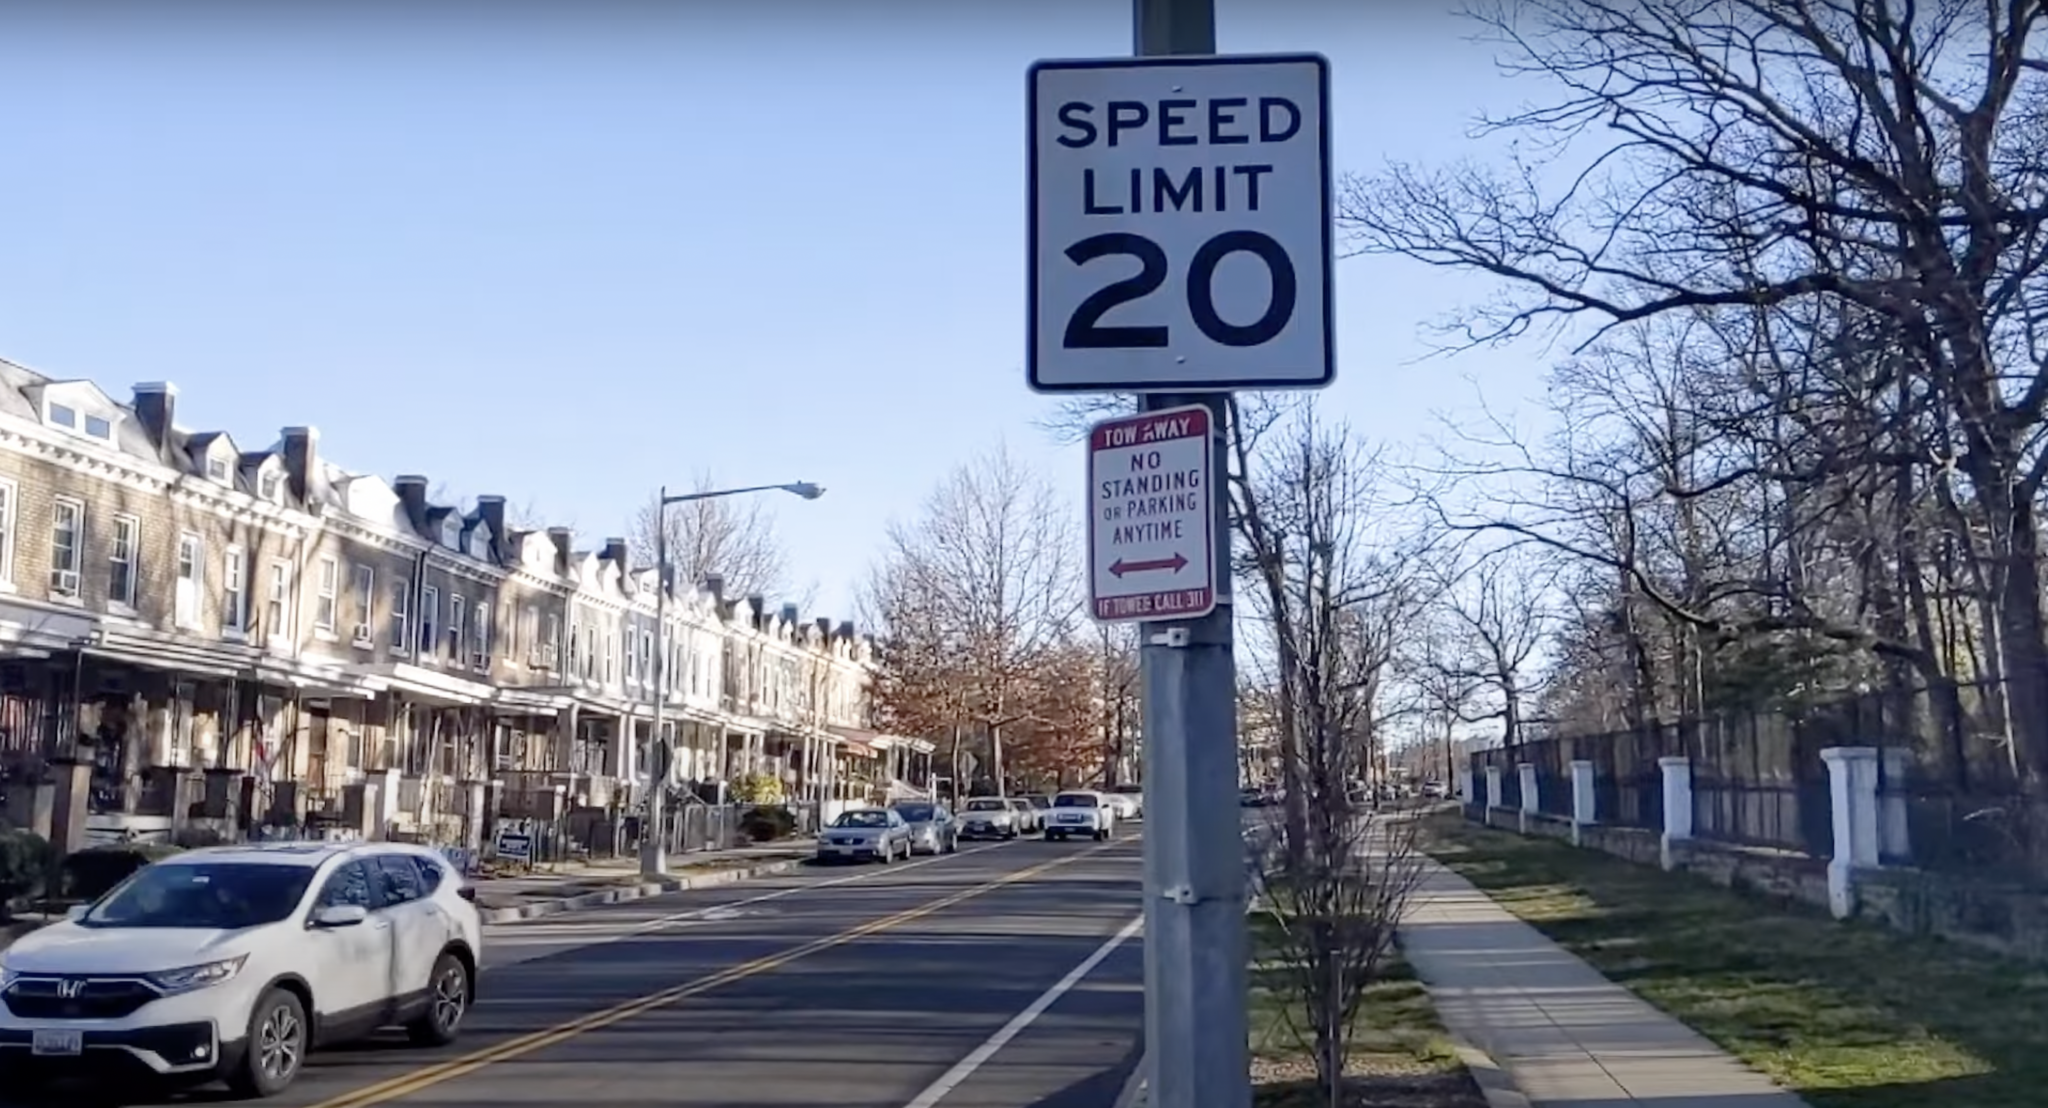 WATCH: Safety and vehicle speed are fundamentally opposed